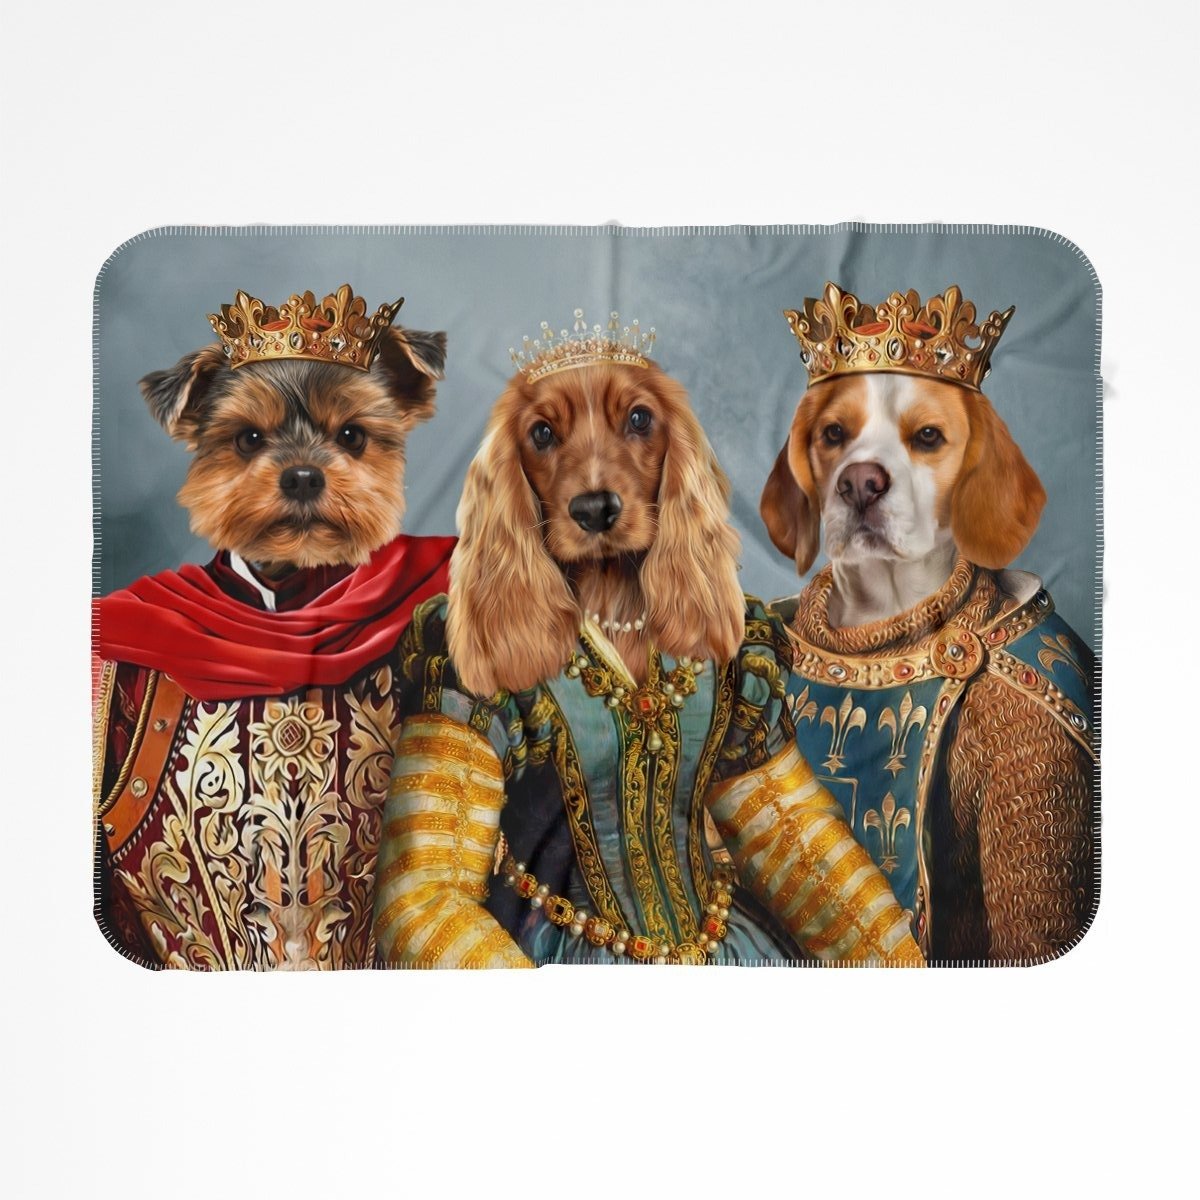 The Imperial 3: Custom Pet Blanket - Paw & Glory - #pet portraits# - #dog portraits# - #pet portraits uk#Paw and glory, Pet portraits blanket,custom blanket for dog lovers, personalized animal blanket, put my dog on a blanket, leopard print dog blanket, print your pet on a blanket